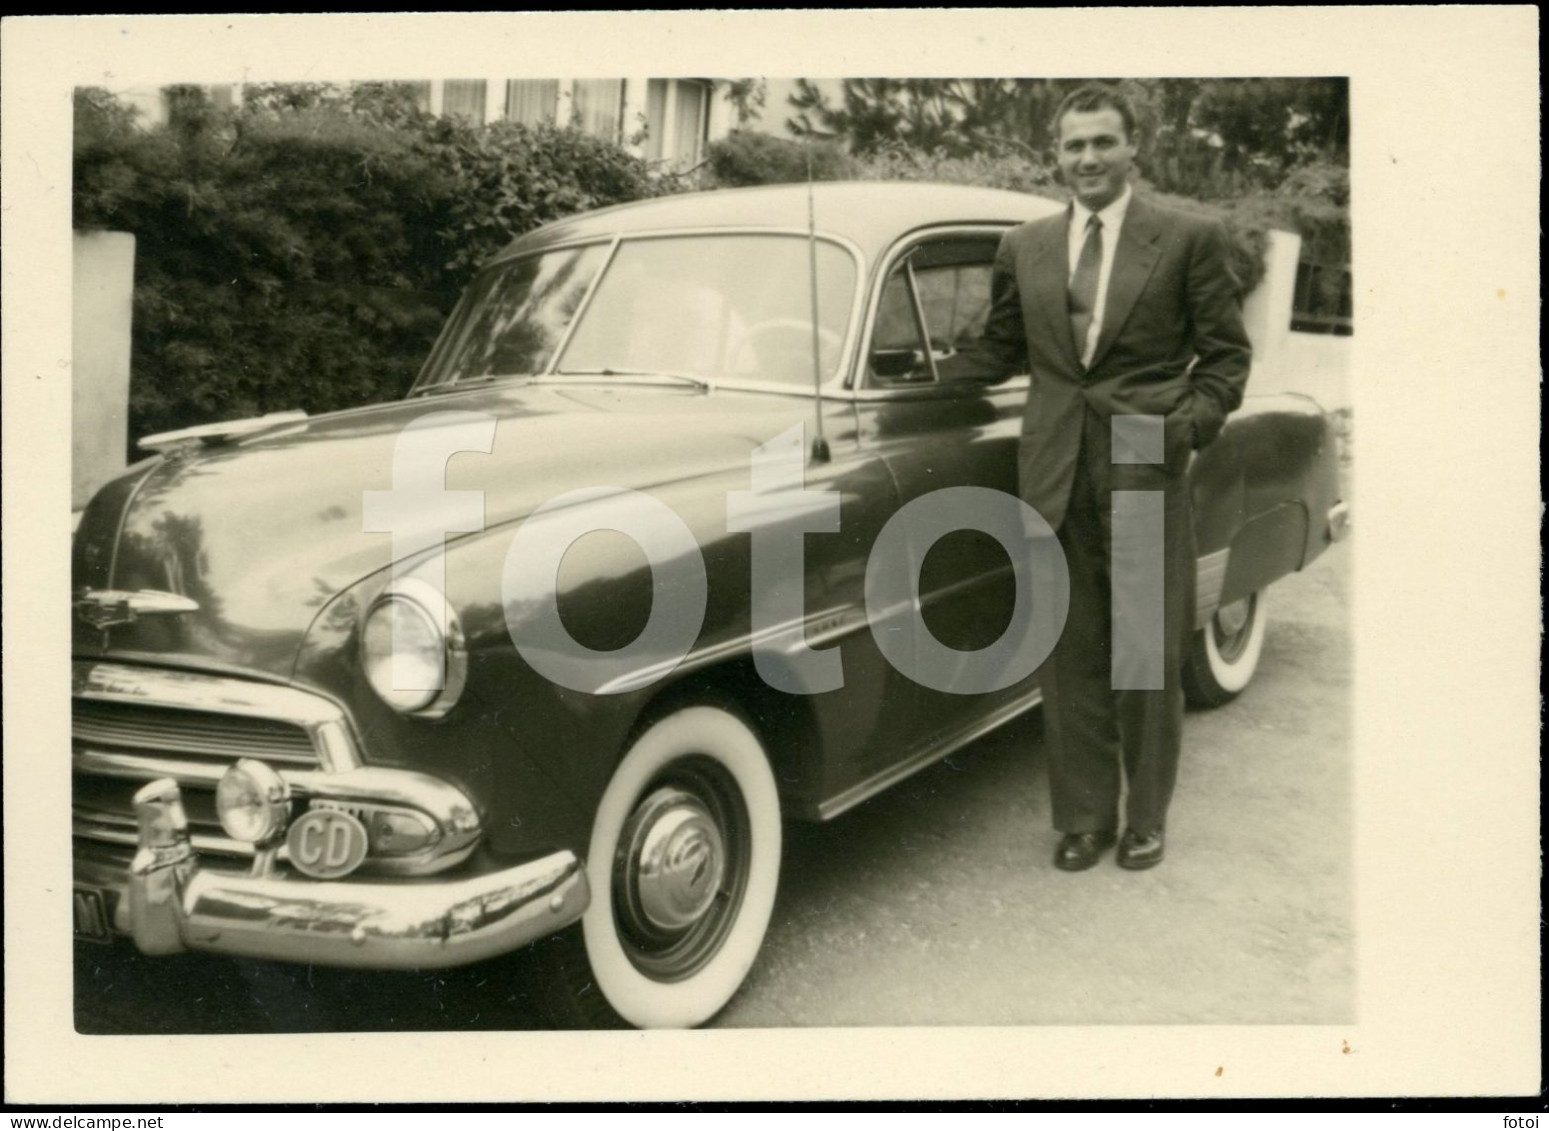 50s REAL PHOTO FOTO CHEVROLET CHEVY CAR DIPLOMATIC CORP AZORES AÇORES PORTUGAL AT8 - Automobile